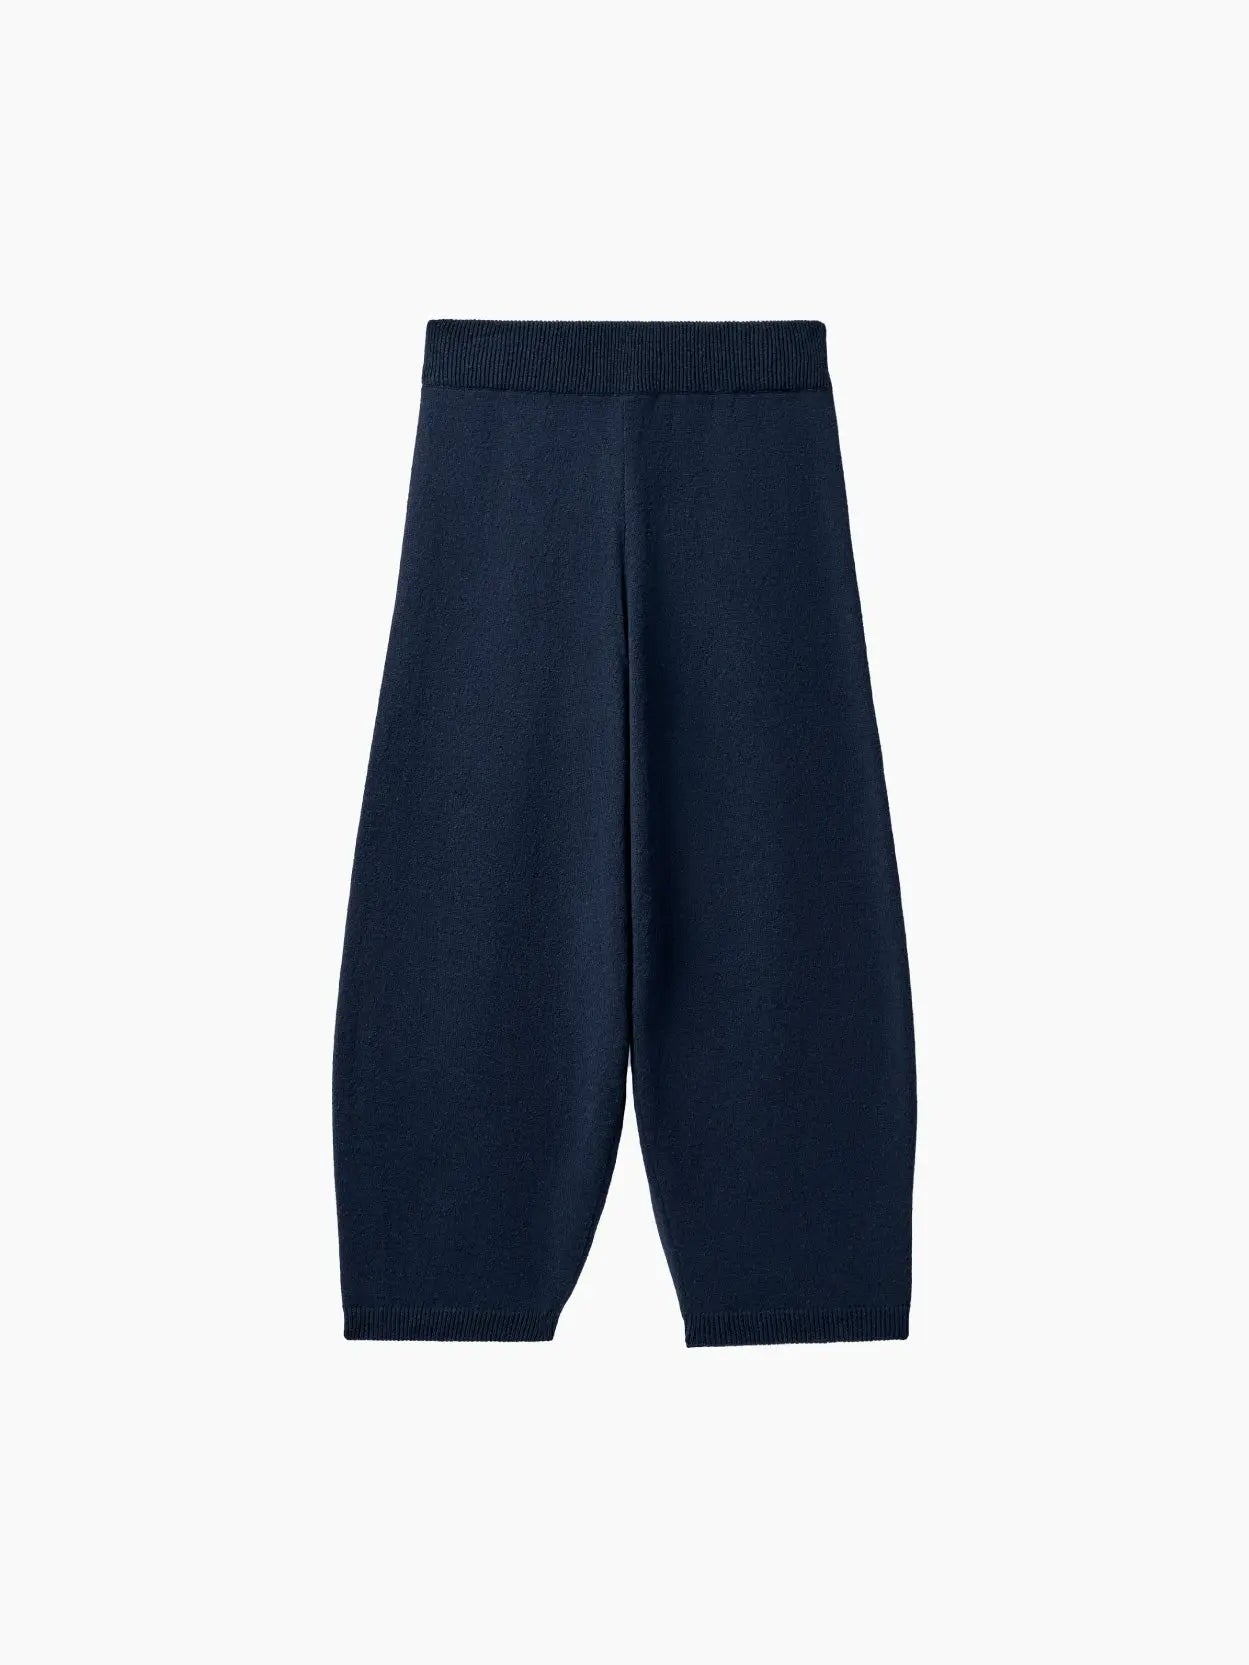 A pair of Cotton Knitted Pants Navy from Cordera with a ribbed elastic waistband. The pants appear to be made of a soft material, suitable for casual wear. The background is plain white.